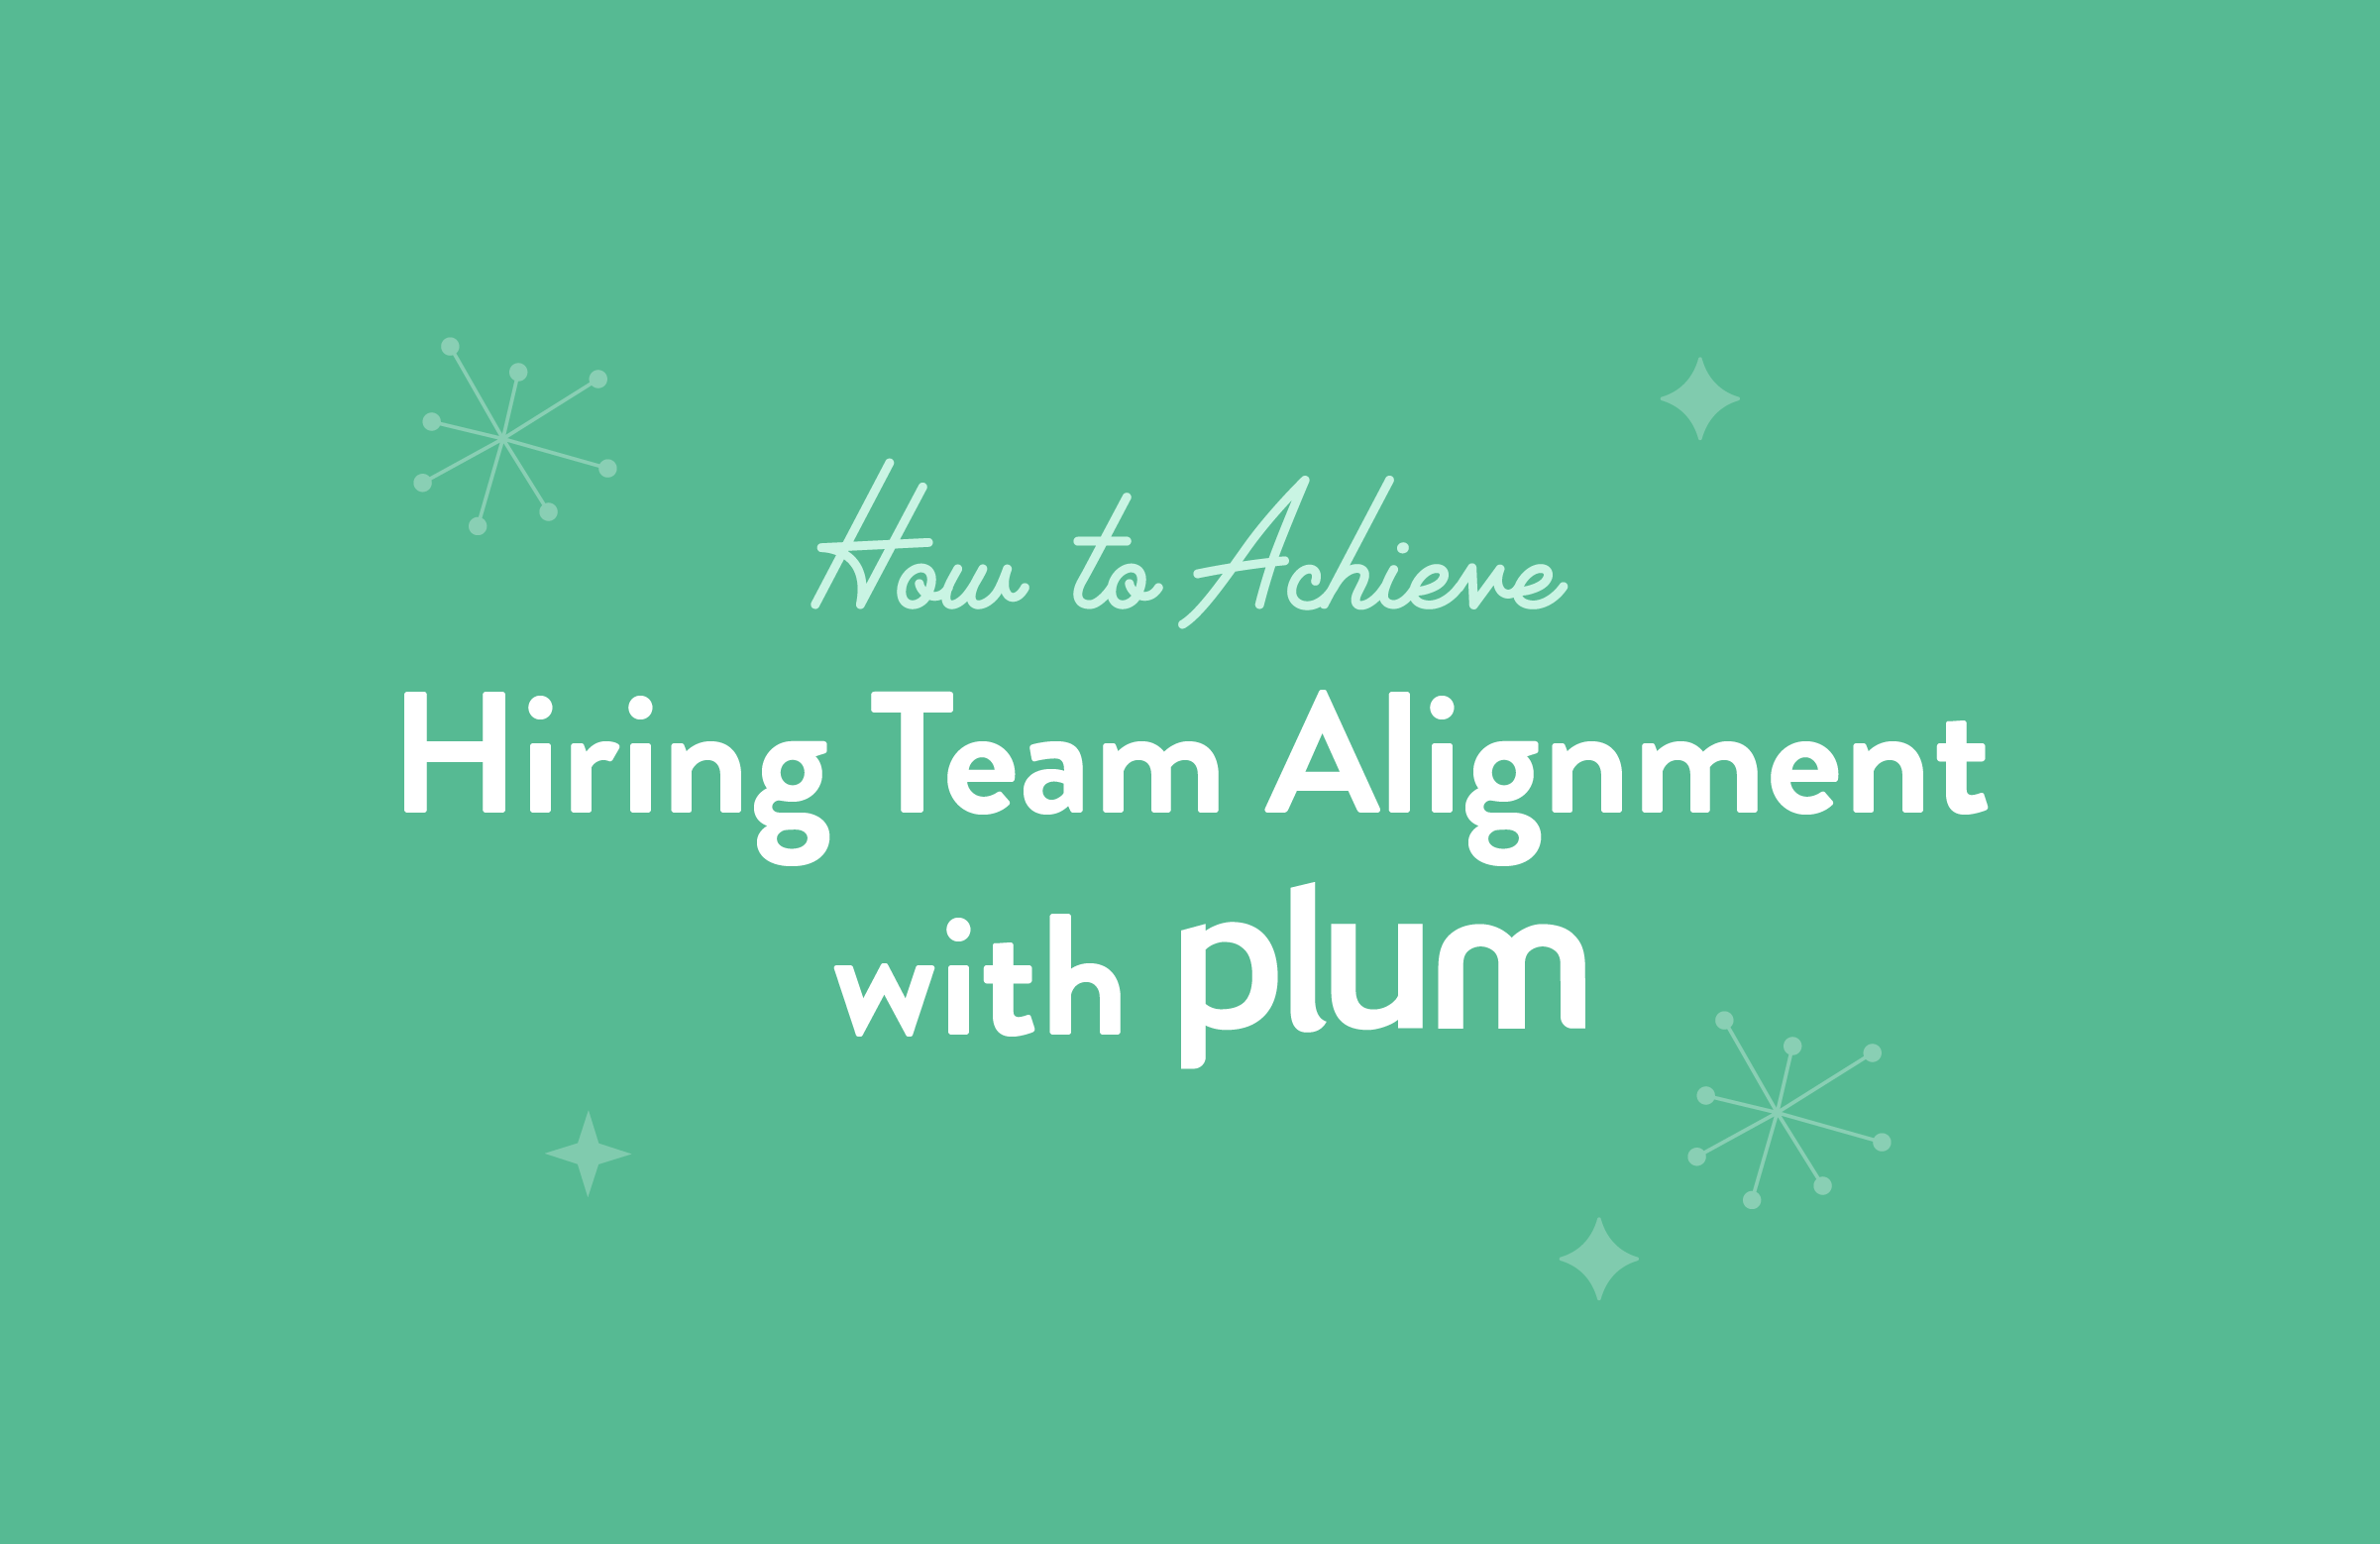 How to Achieve Hiring Team Alignment with Plum